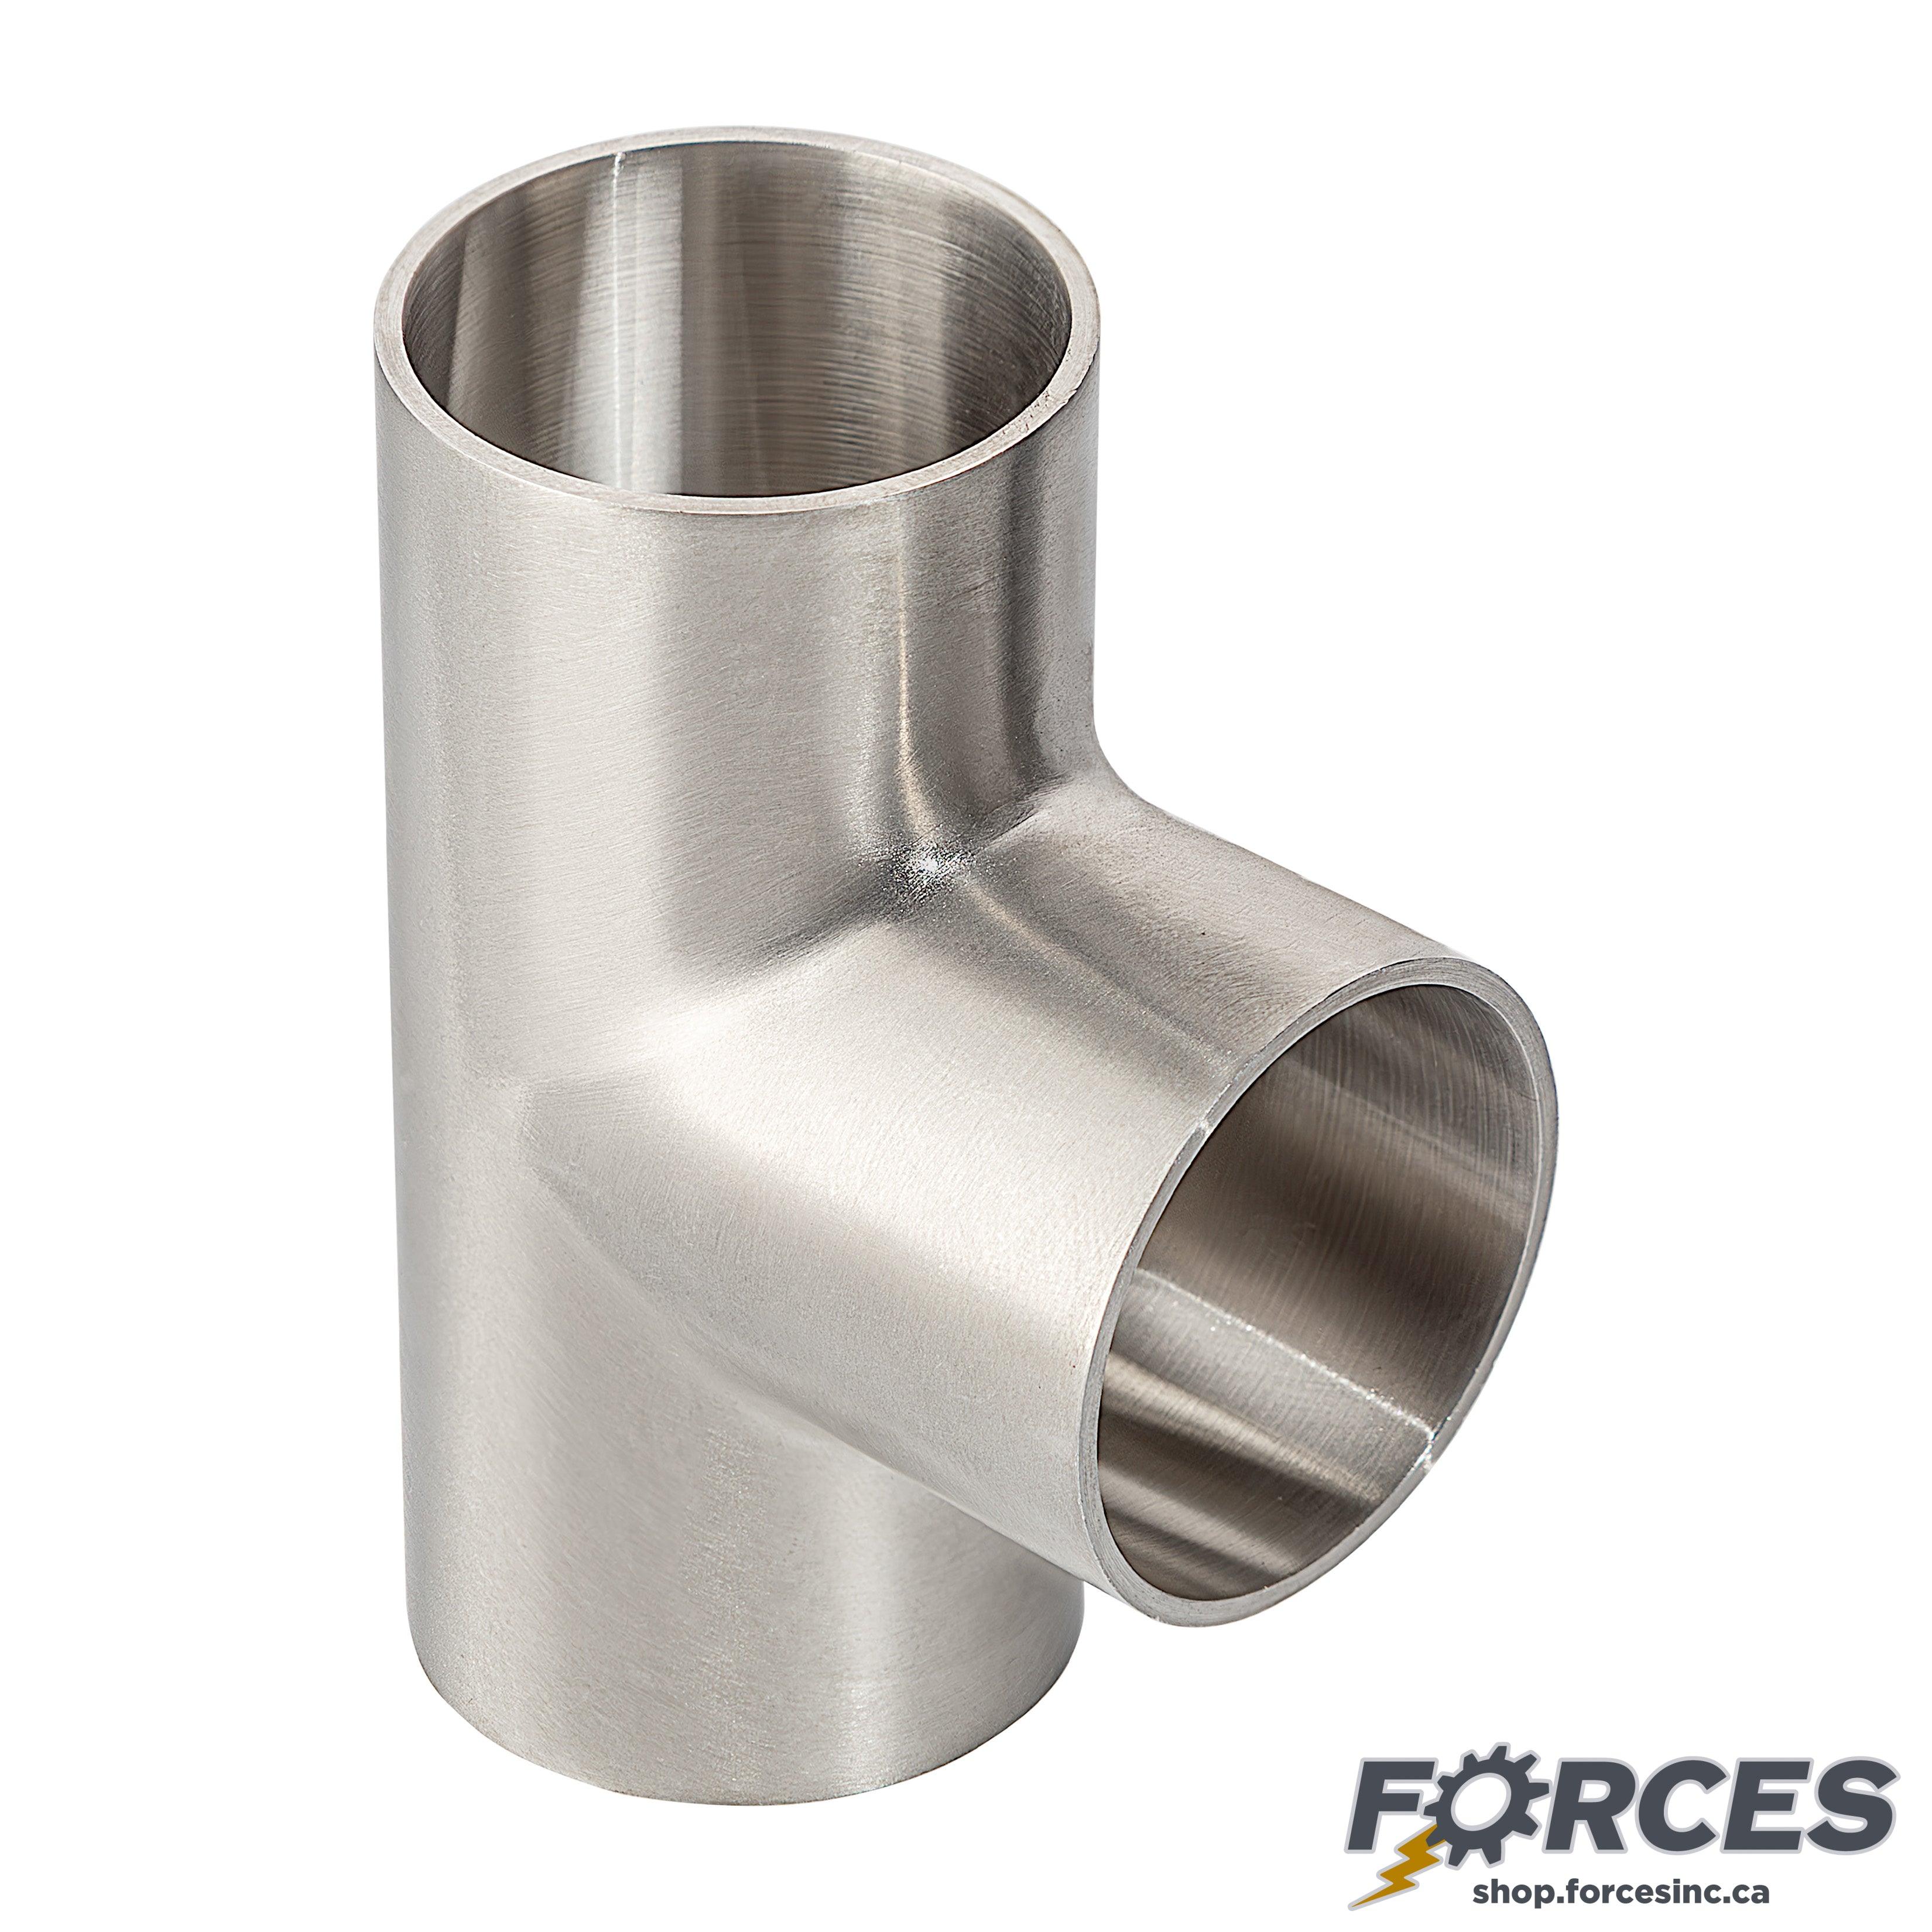 6" Butt Weld Short Tee - Stainless Steel 316 - Forces Inc